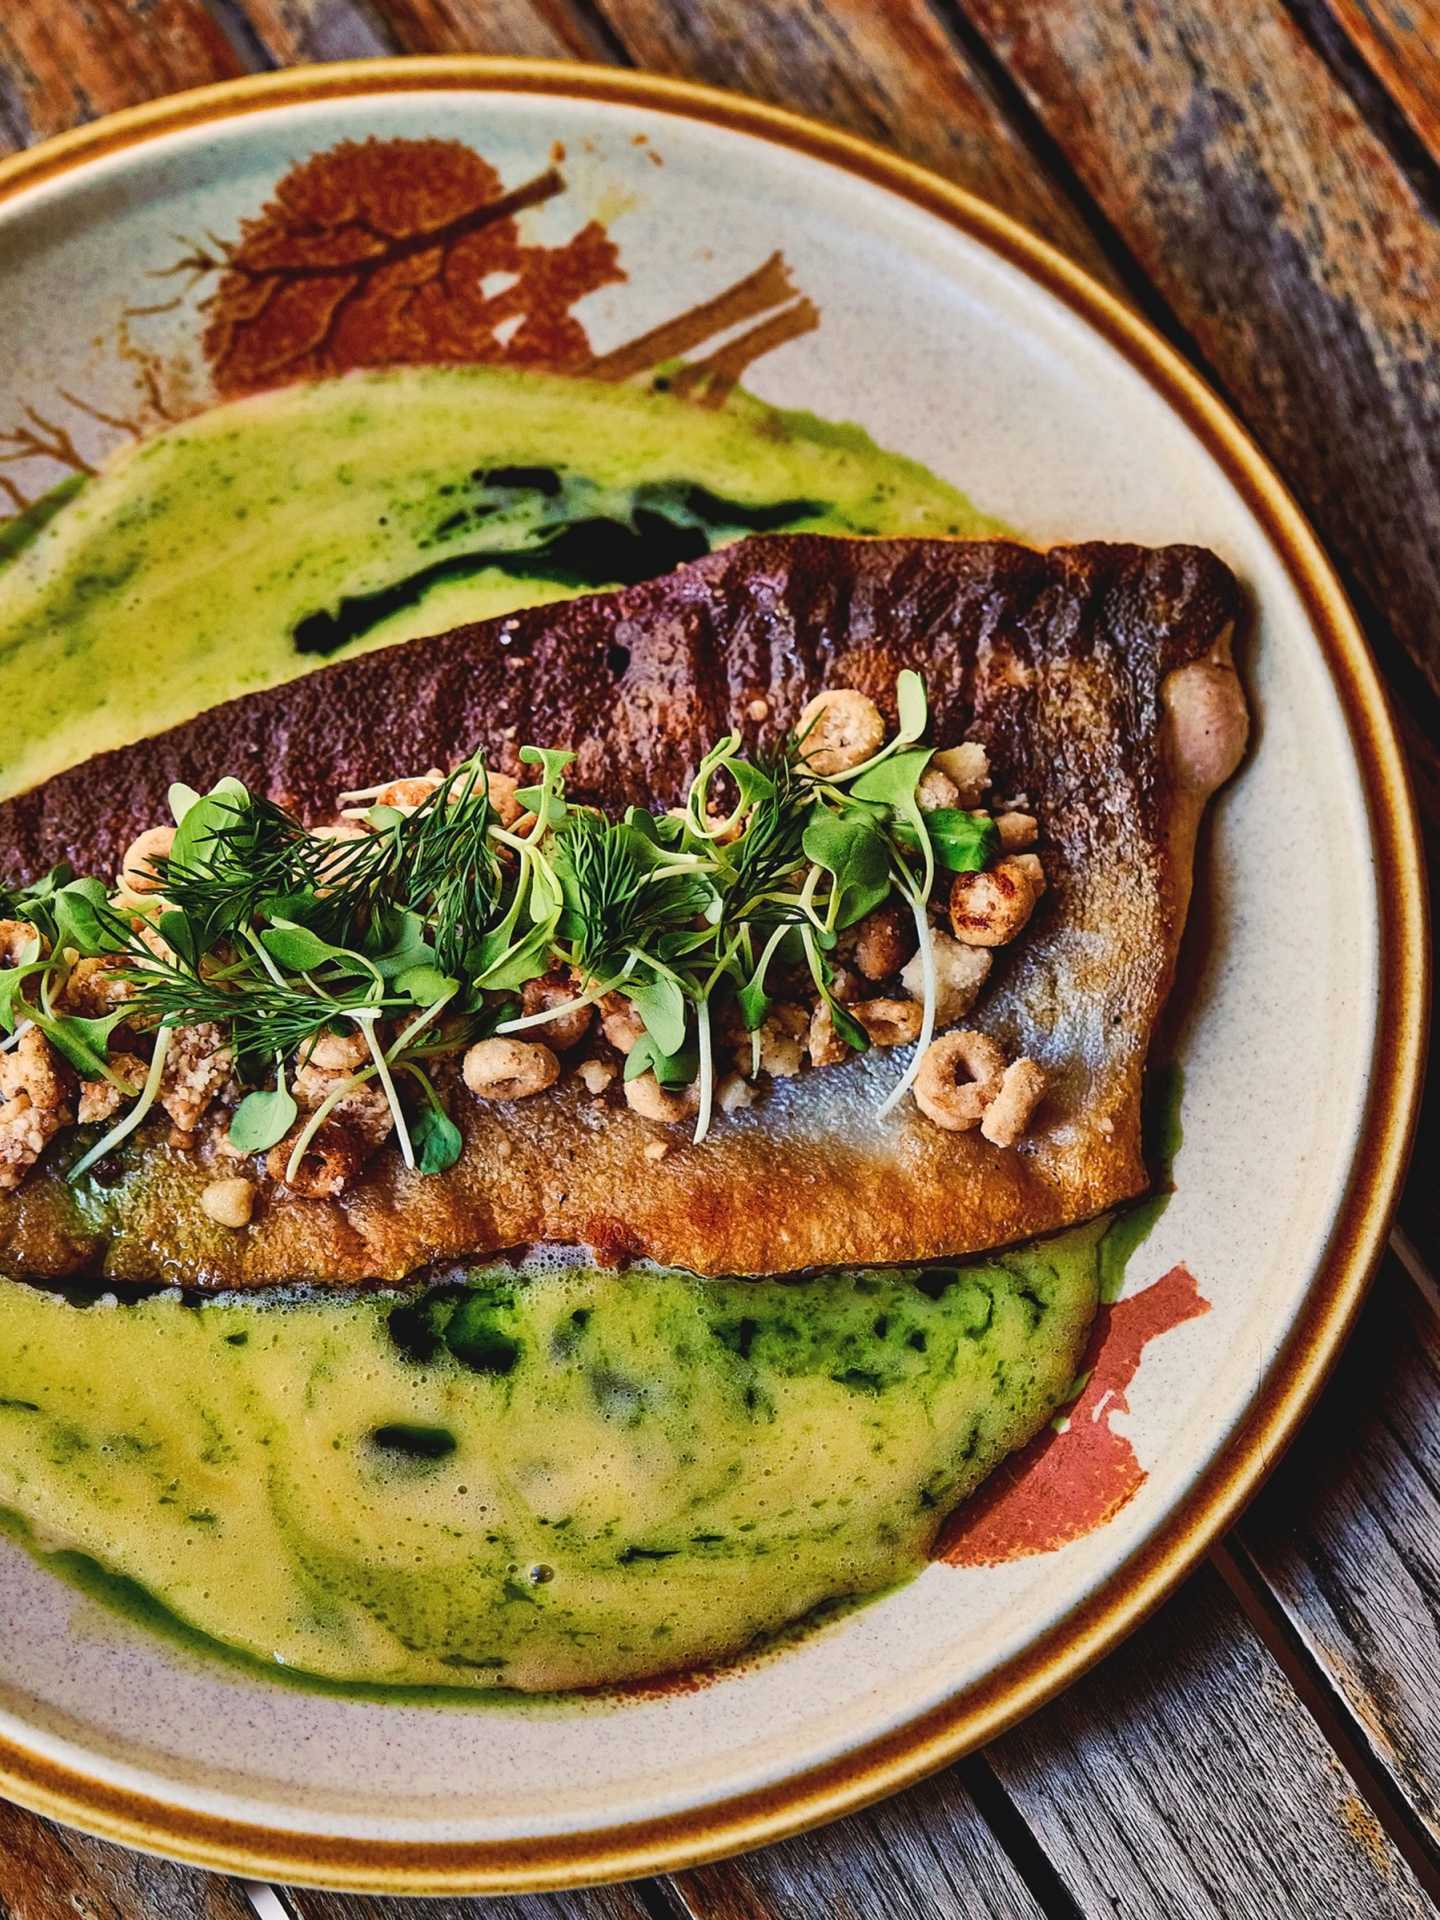 Best new Toronto restaurants | Springhills Trout uses a cheerio and sesame garnish instead of almonds